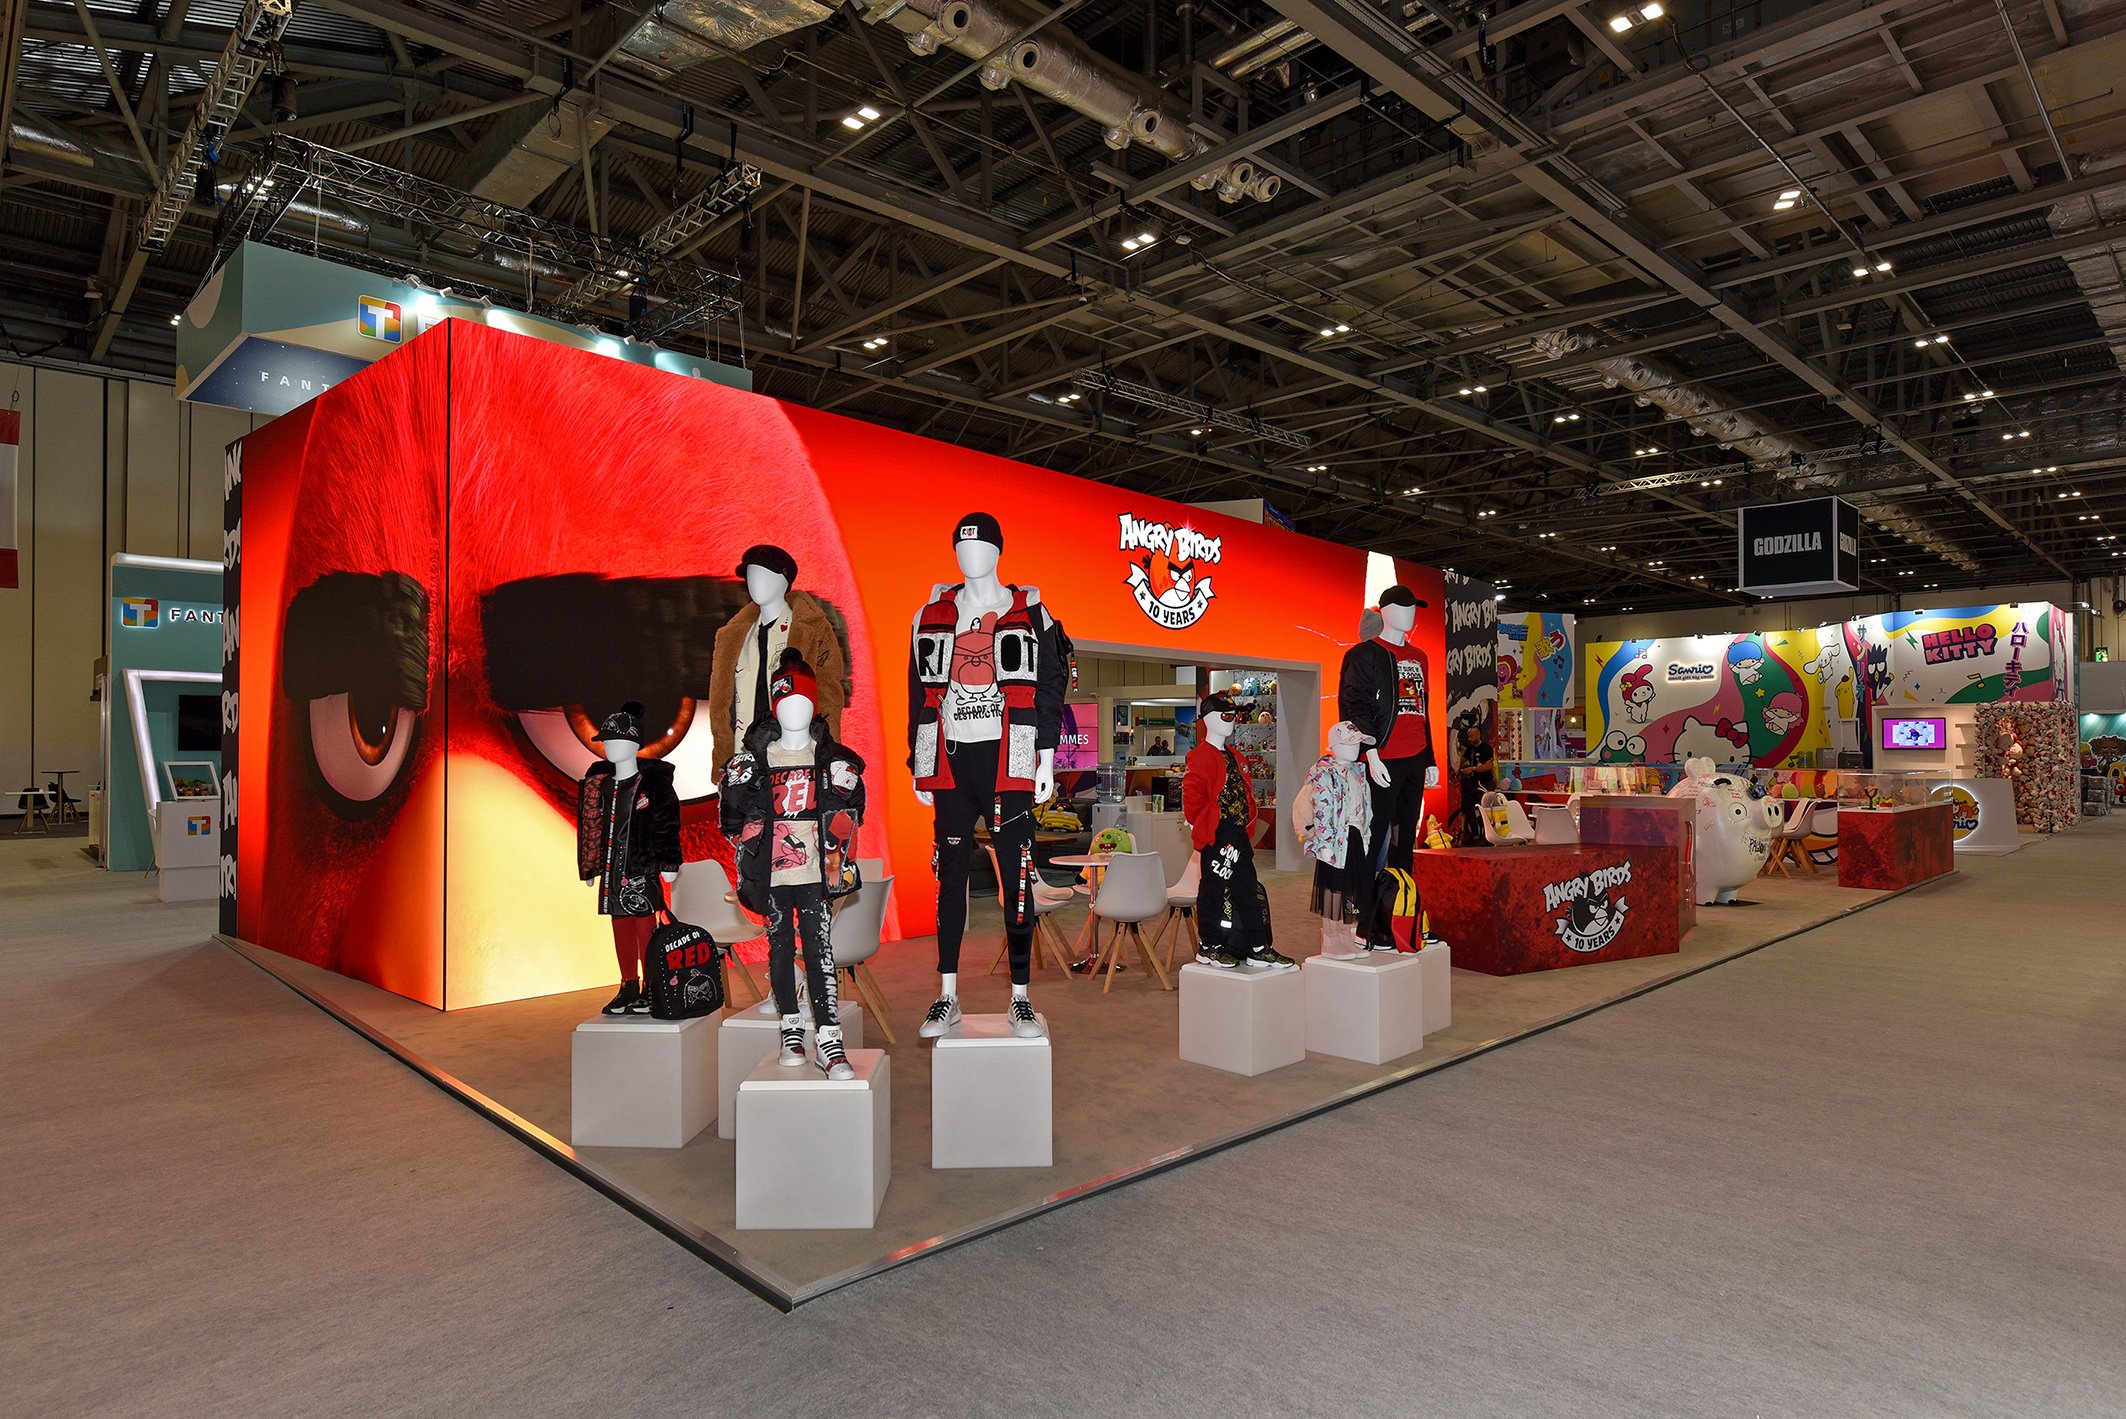 Get A Bespoke, Branded Immersive Trade Show Booth From This Creative UK Company